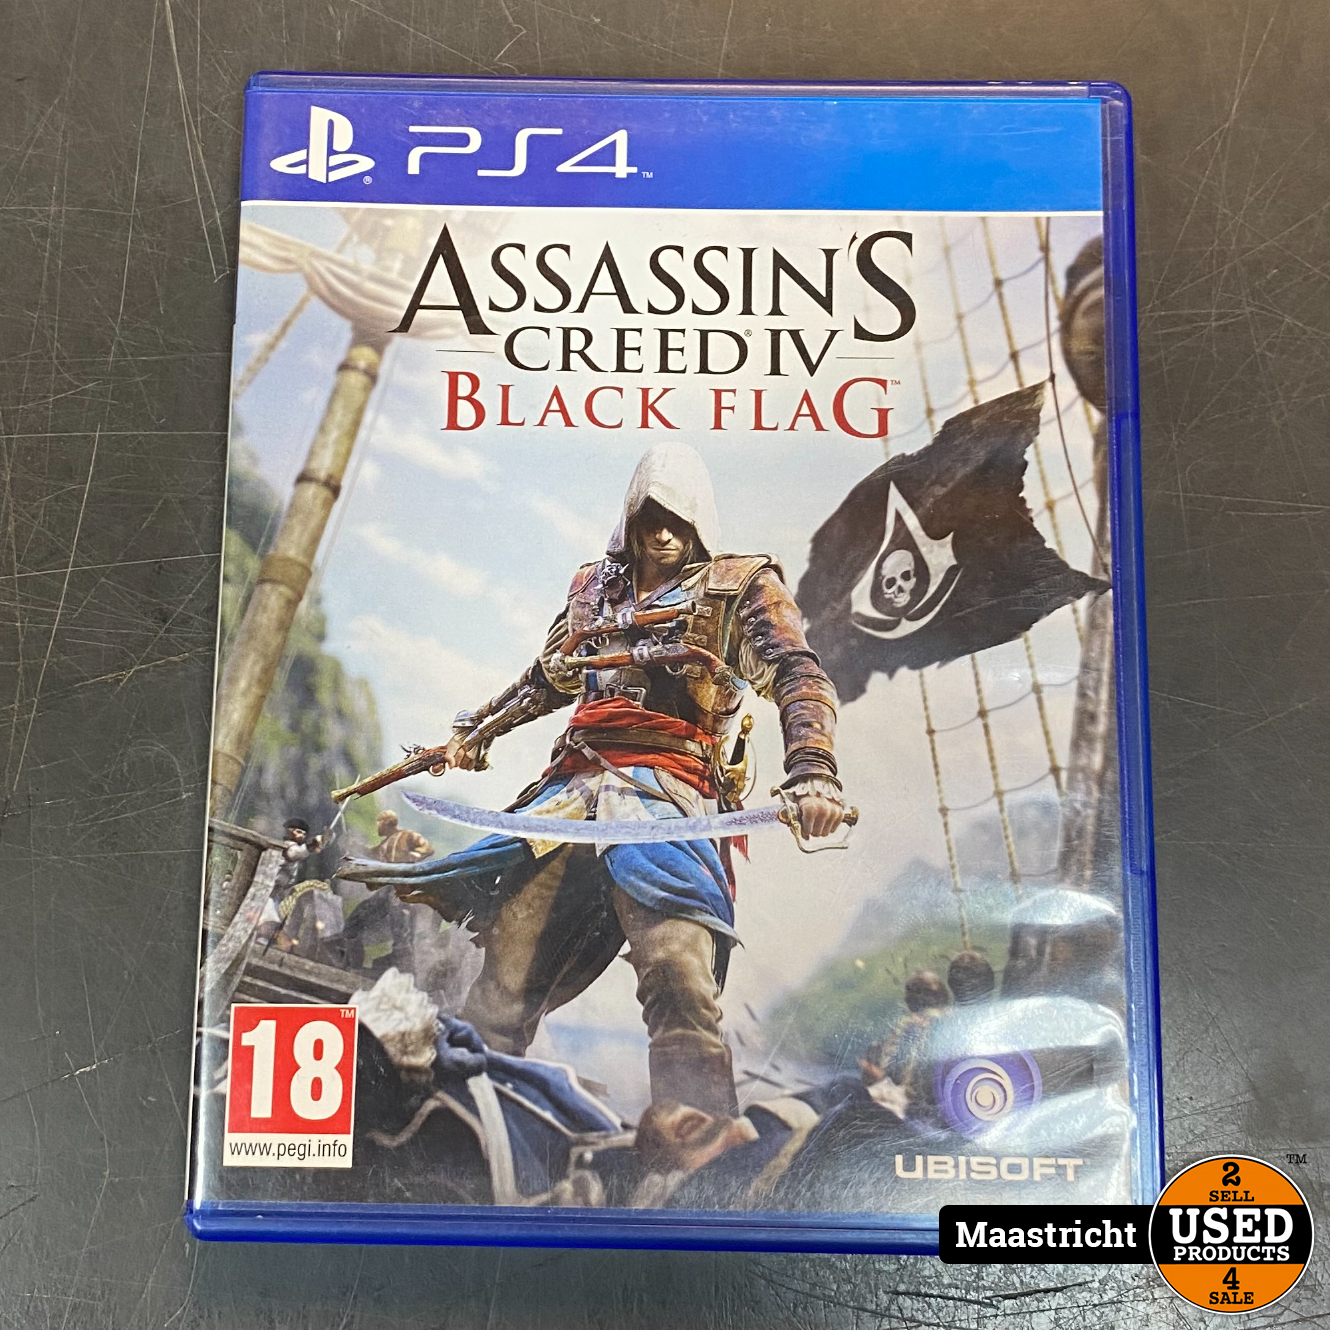 extract Vegen Leraren dag Playstation Assasin's Creed IV- Black Flag PS4 - Used Products Maastricht